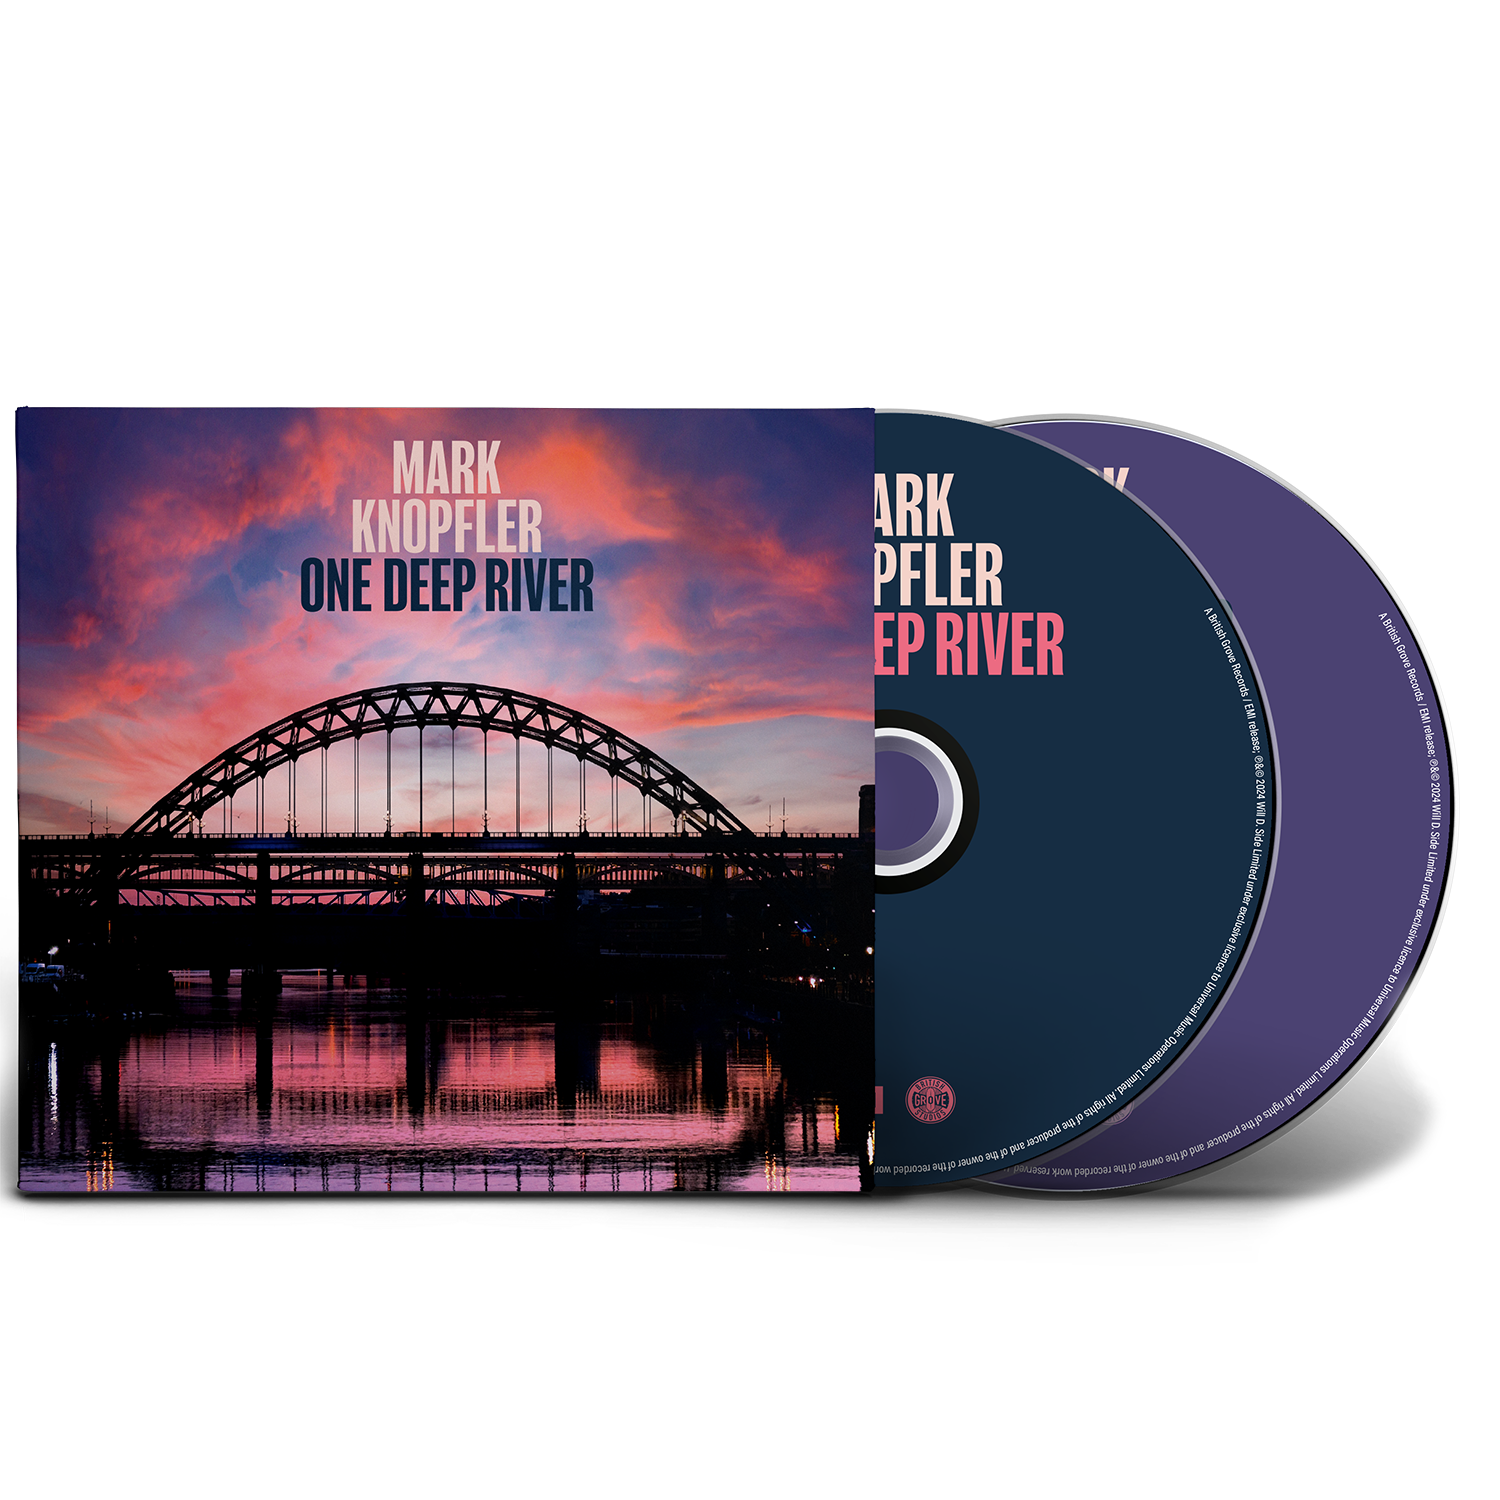 Mark Knopfler - One Deep River Deluxe 2CD Edition